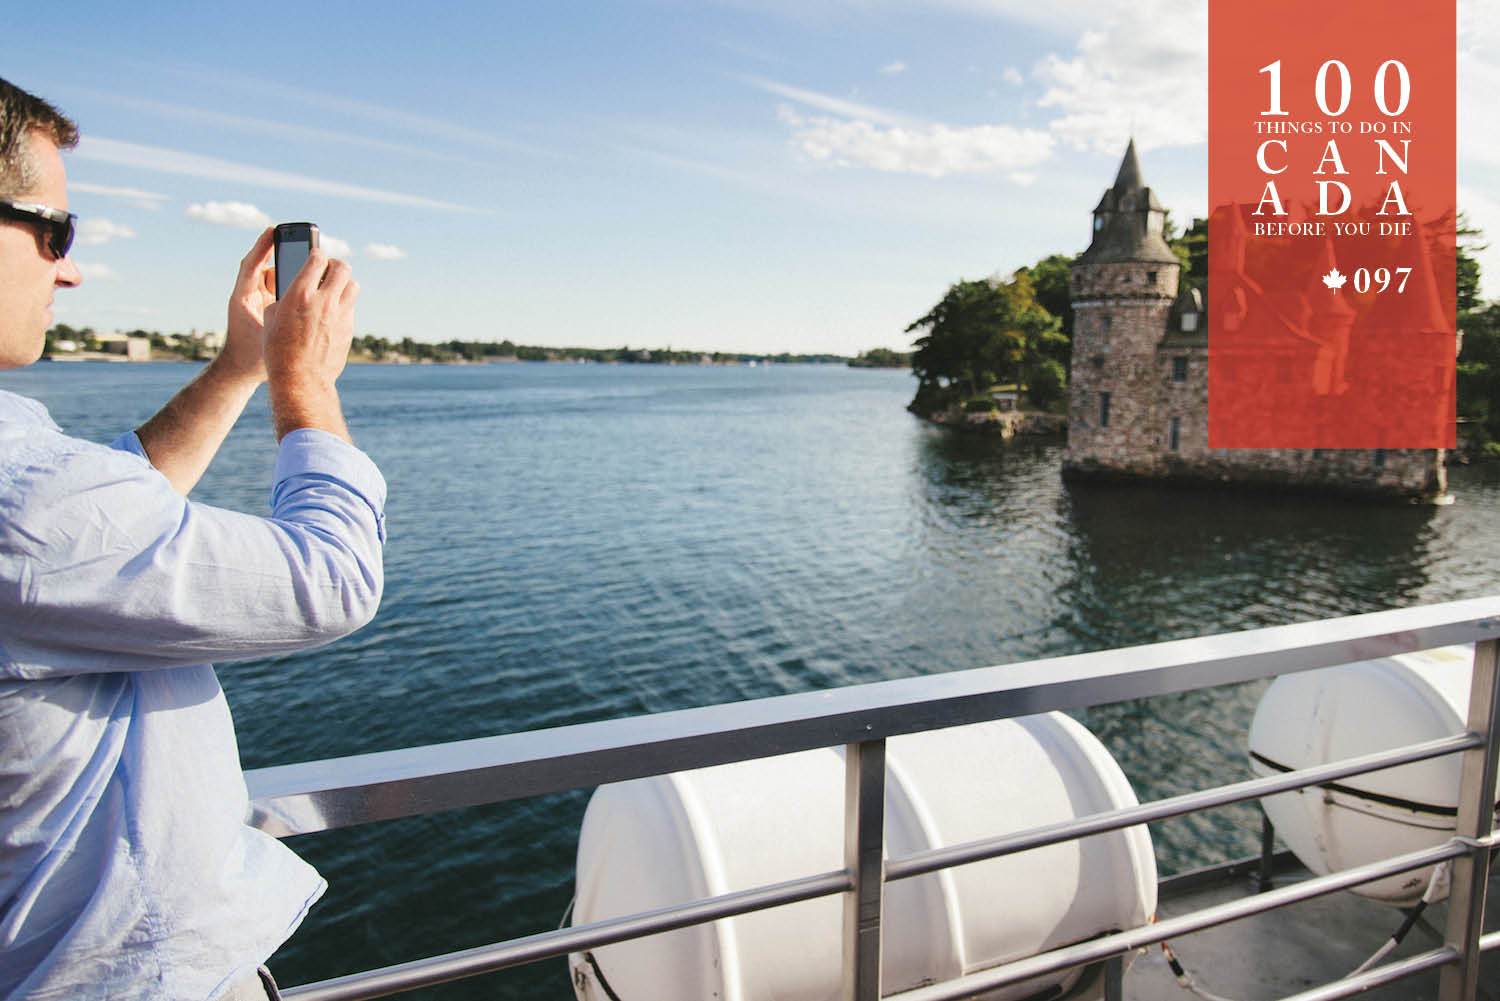 Cruise among the Palaces and Palisades of Canada's glorious Thousand Islands